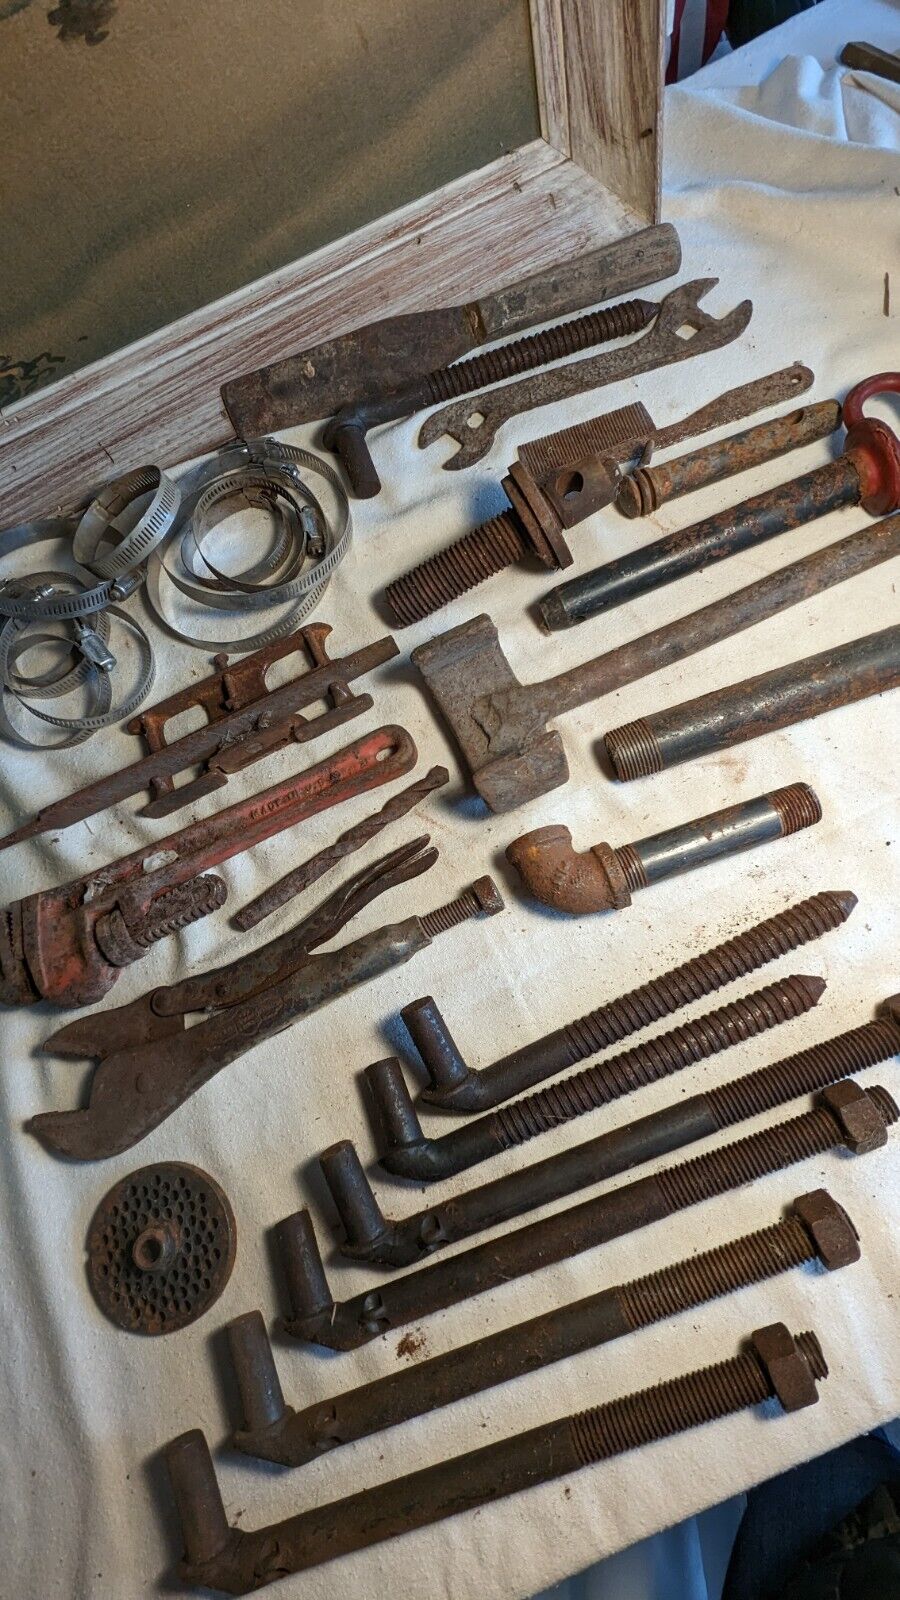 VINTAGE ANTIQUE Old Rusty Wrench Lot RUSTIC FARMHOUSE DECOR Craft 31 Tools